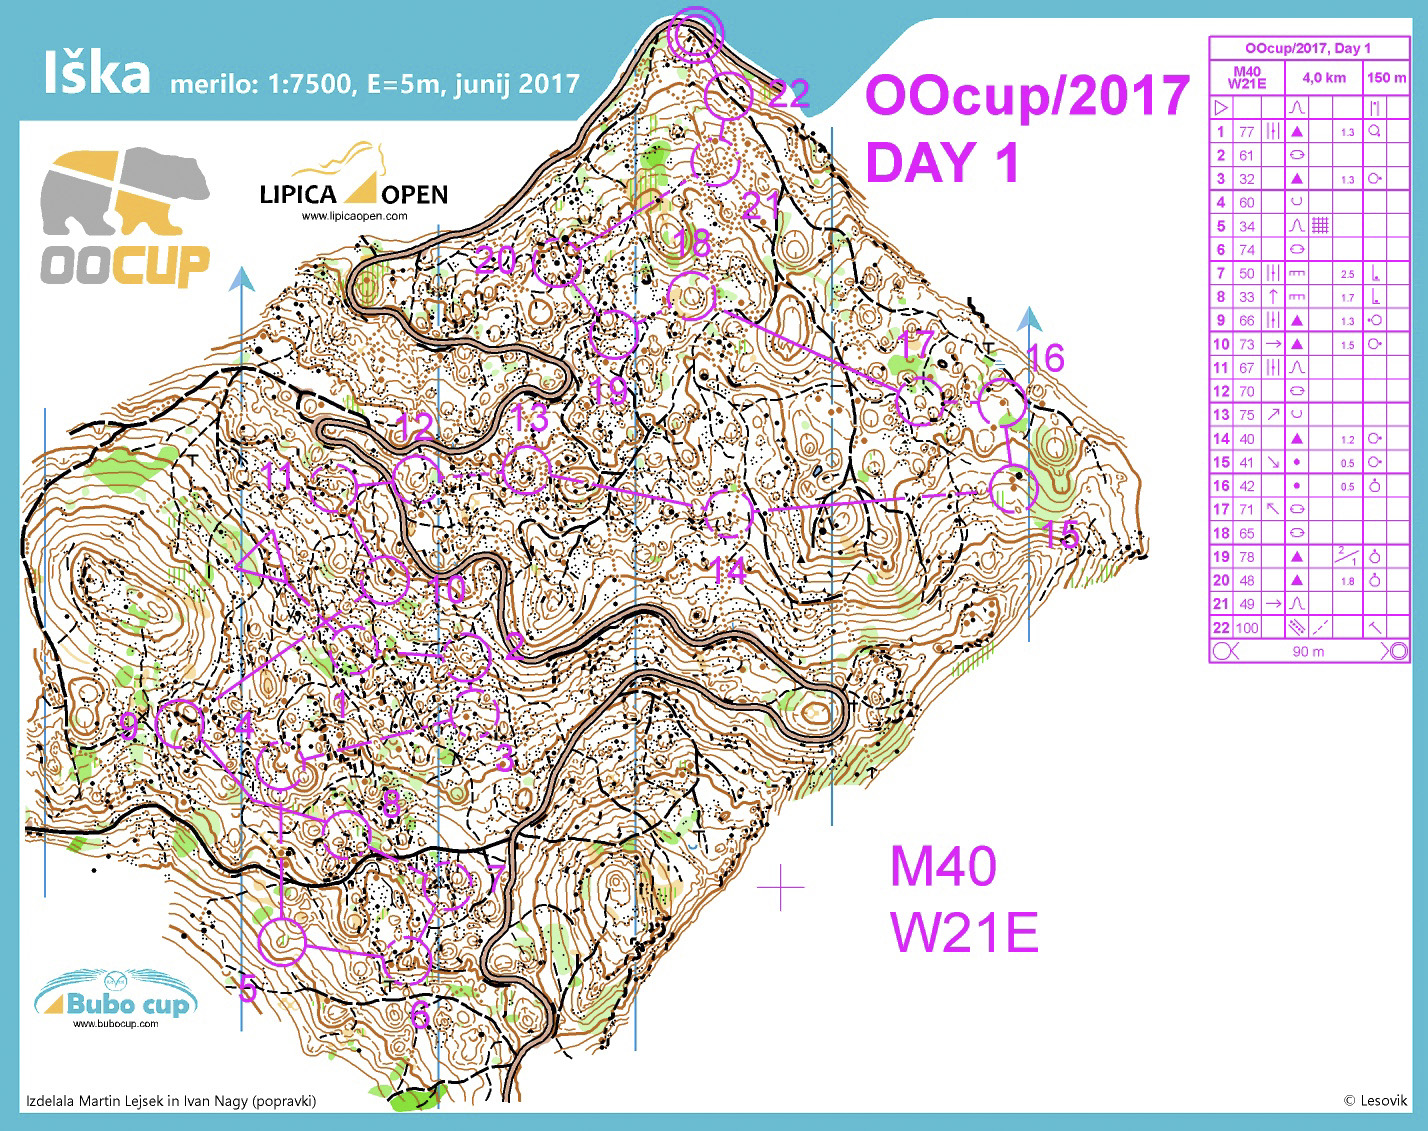 Oocup 2017 Day 1 (24/07/2017)